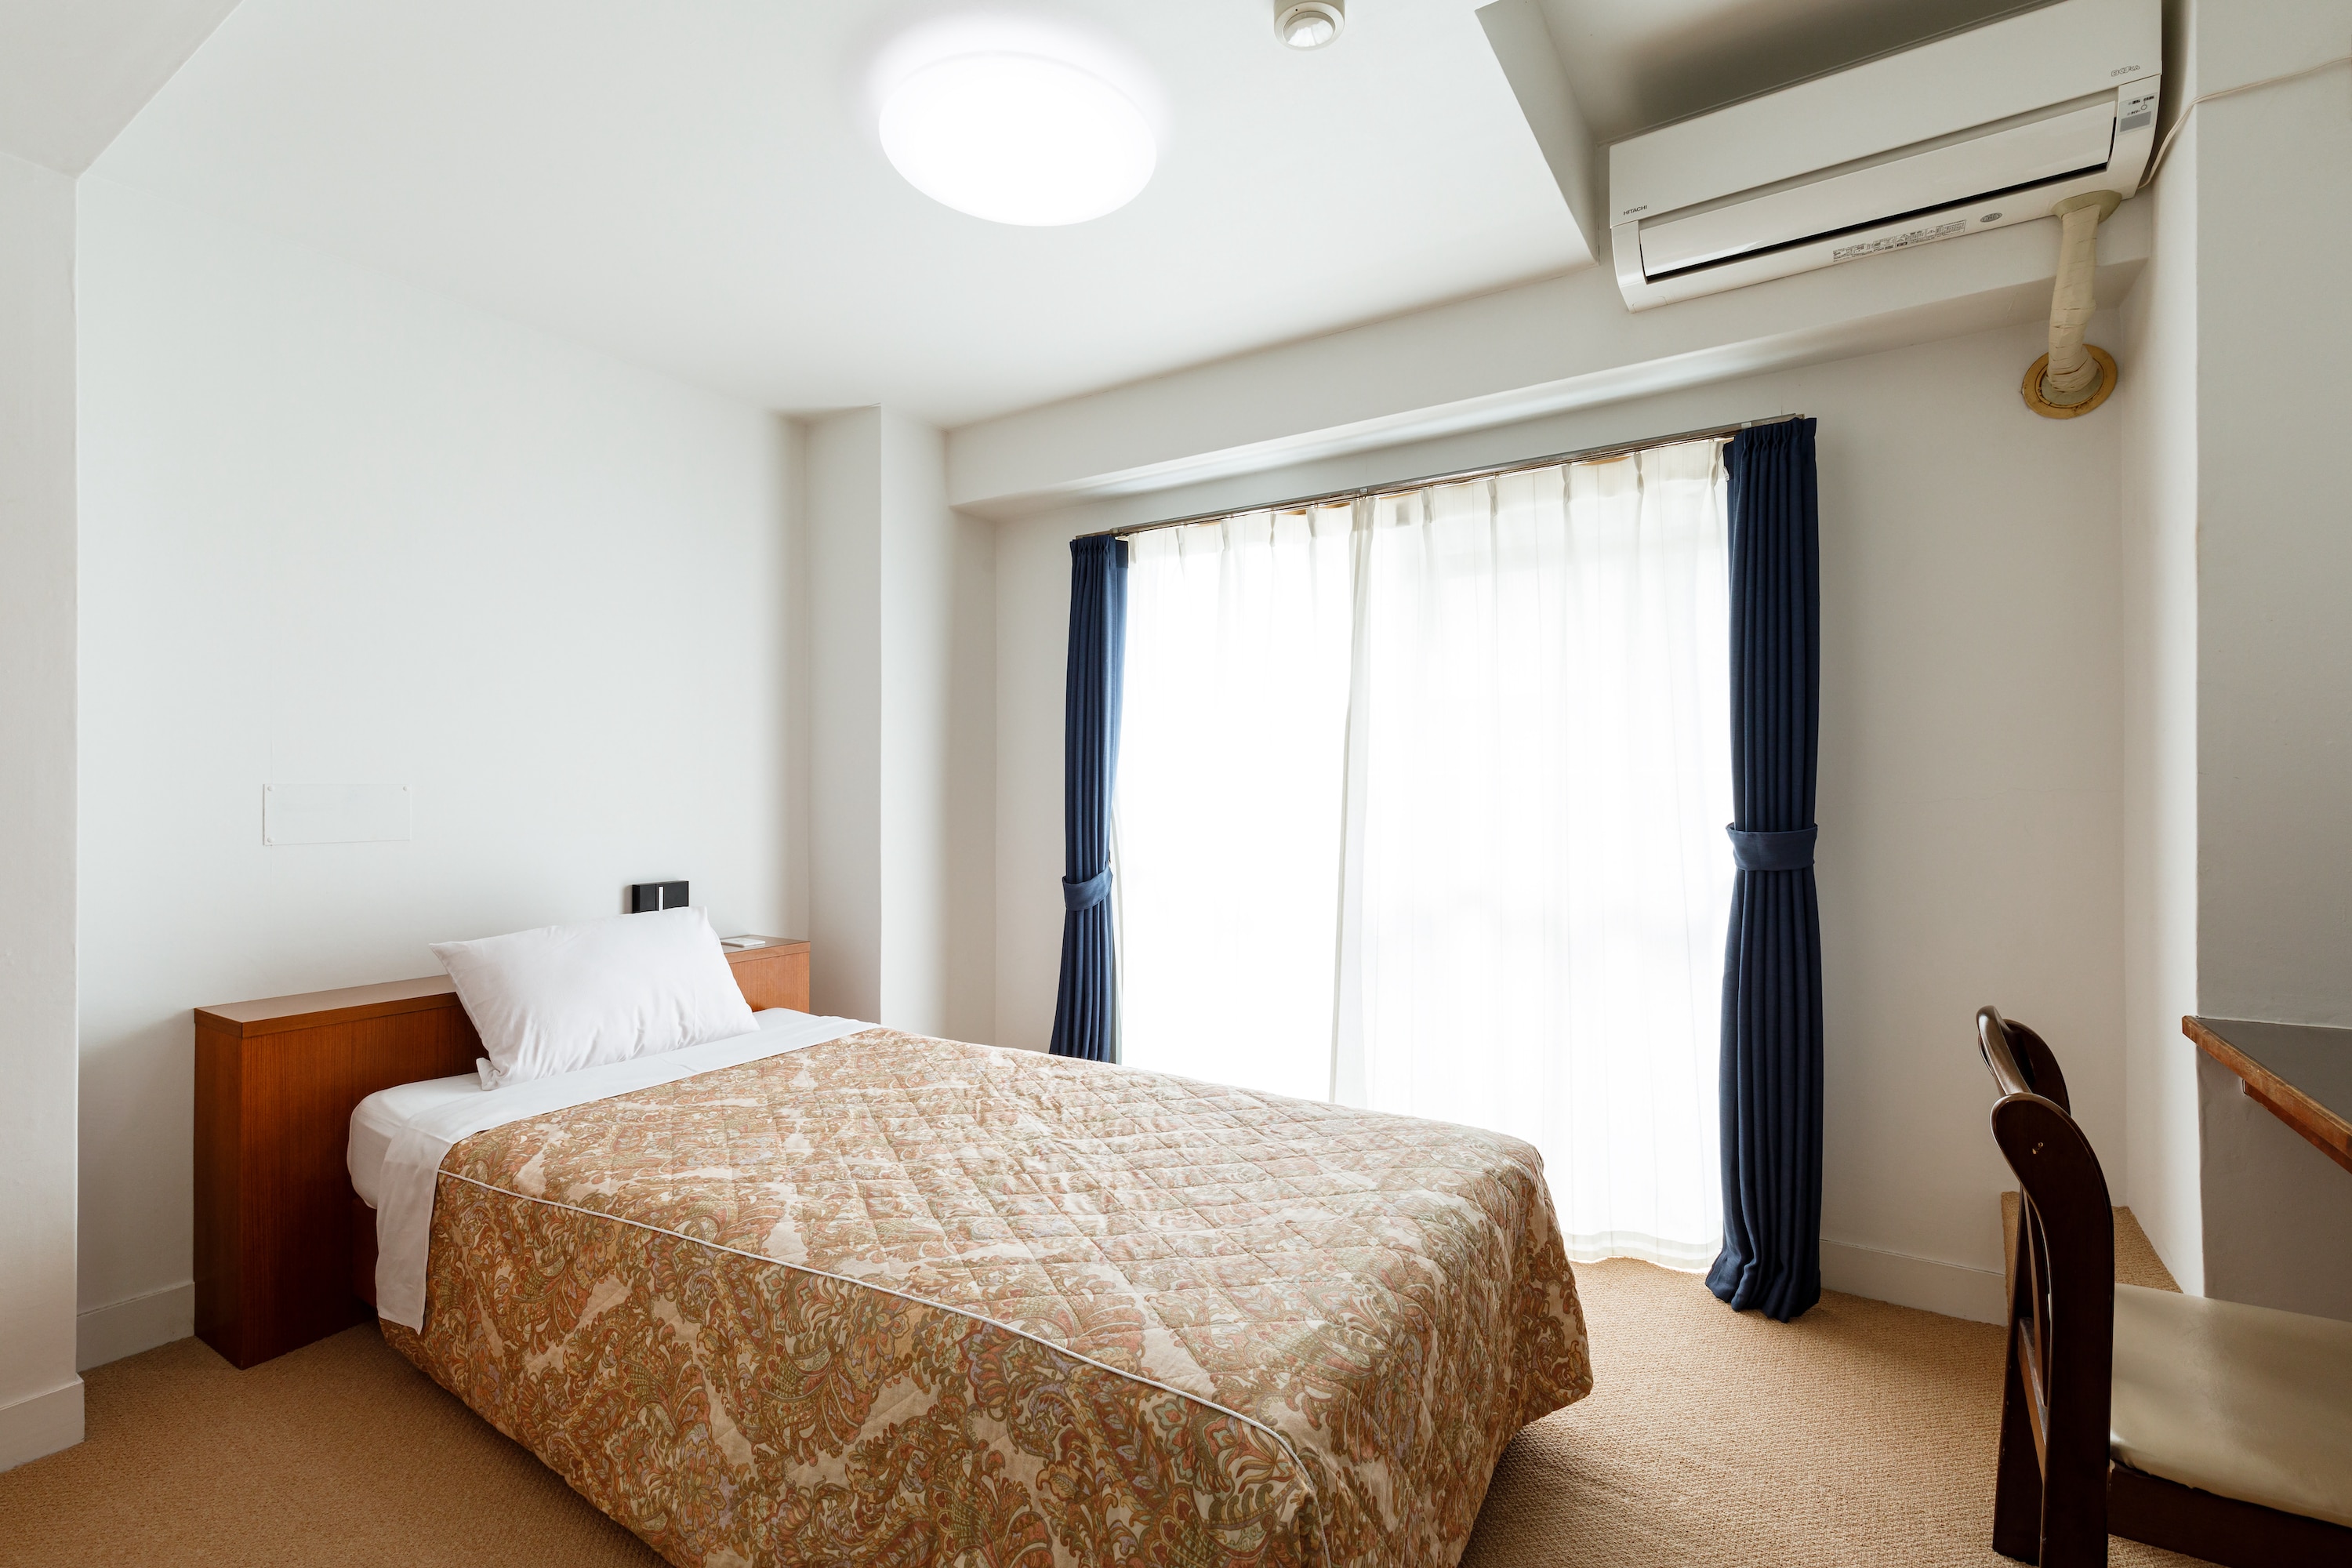 [Guest rooms] Single room / All rooms are non-smoking / Spacious 19 square meters / All rooms have separate bath and toilet / All rooms are equipped with a kitchenette